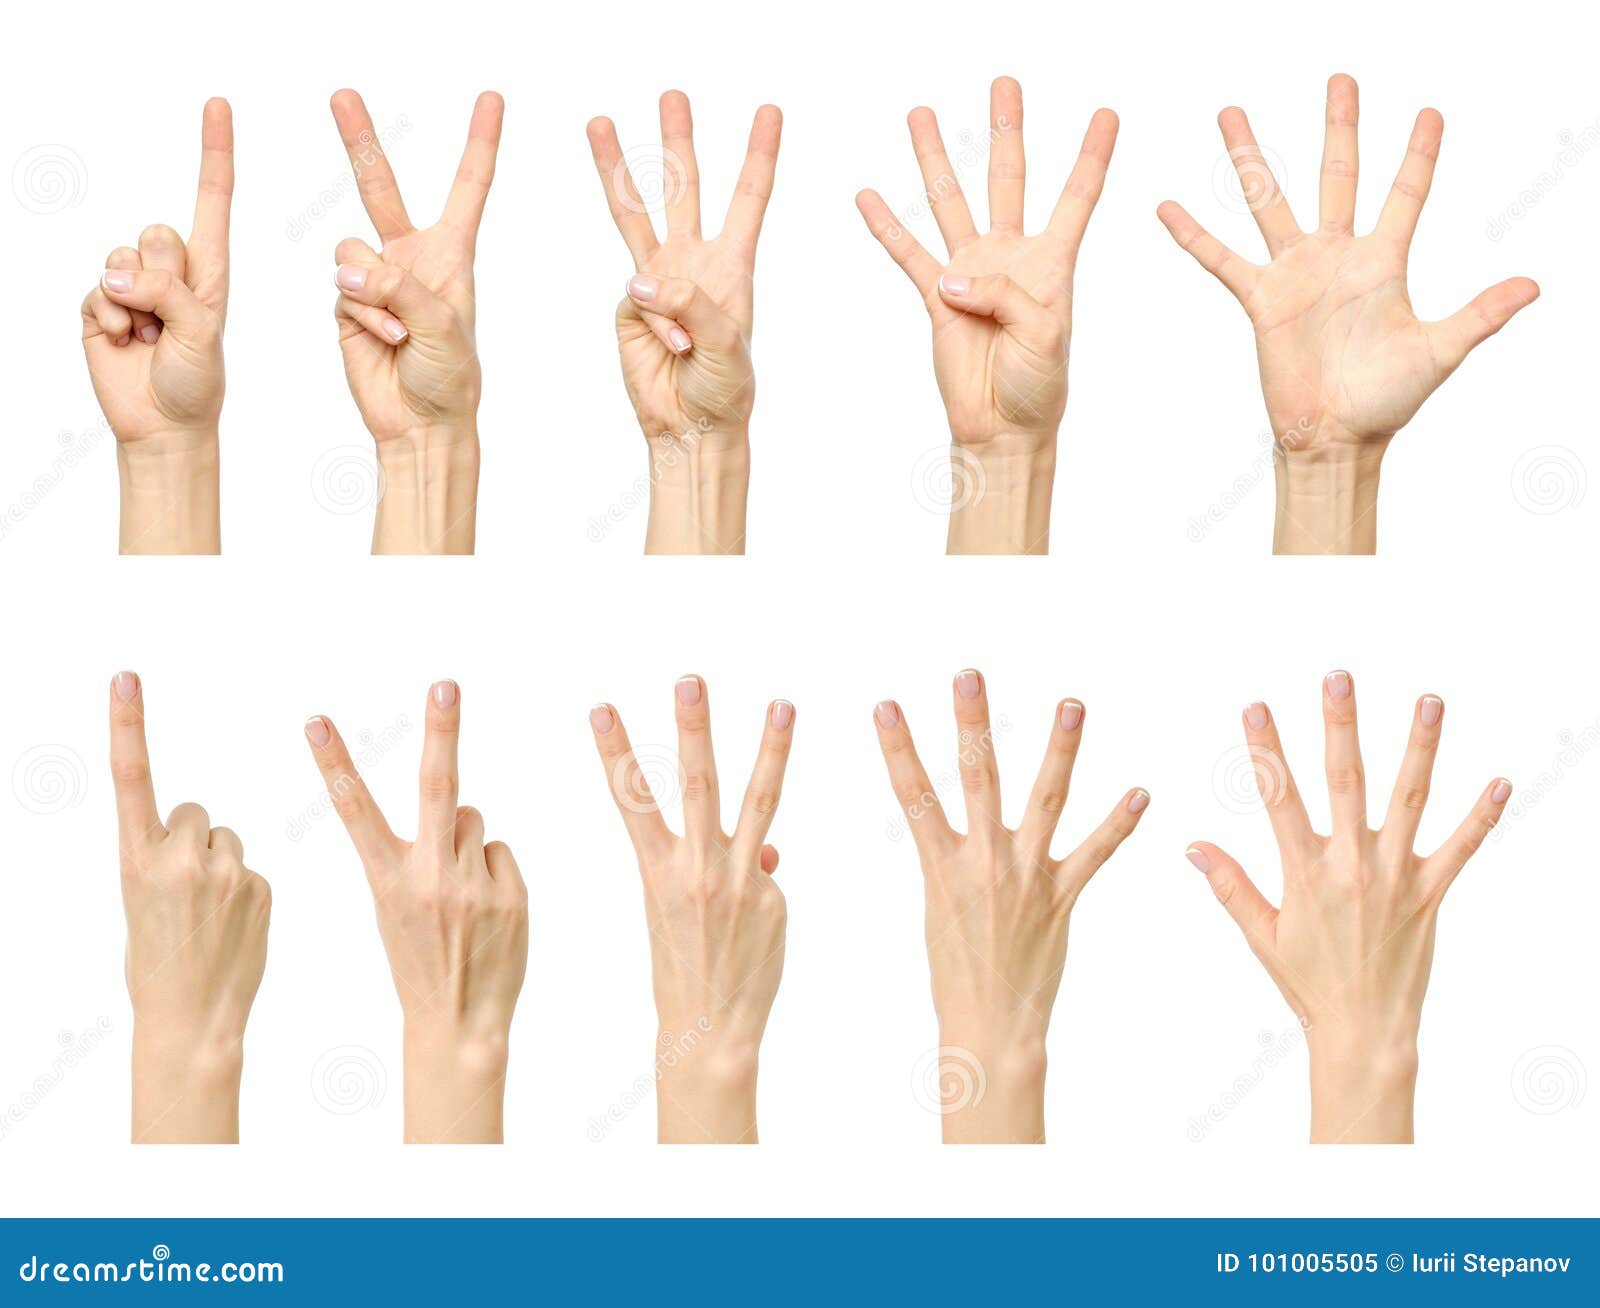 Female Hand Counting From One To Five Stock Image - Image of caucasian ...